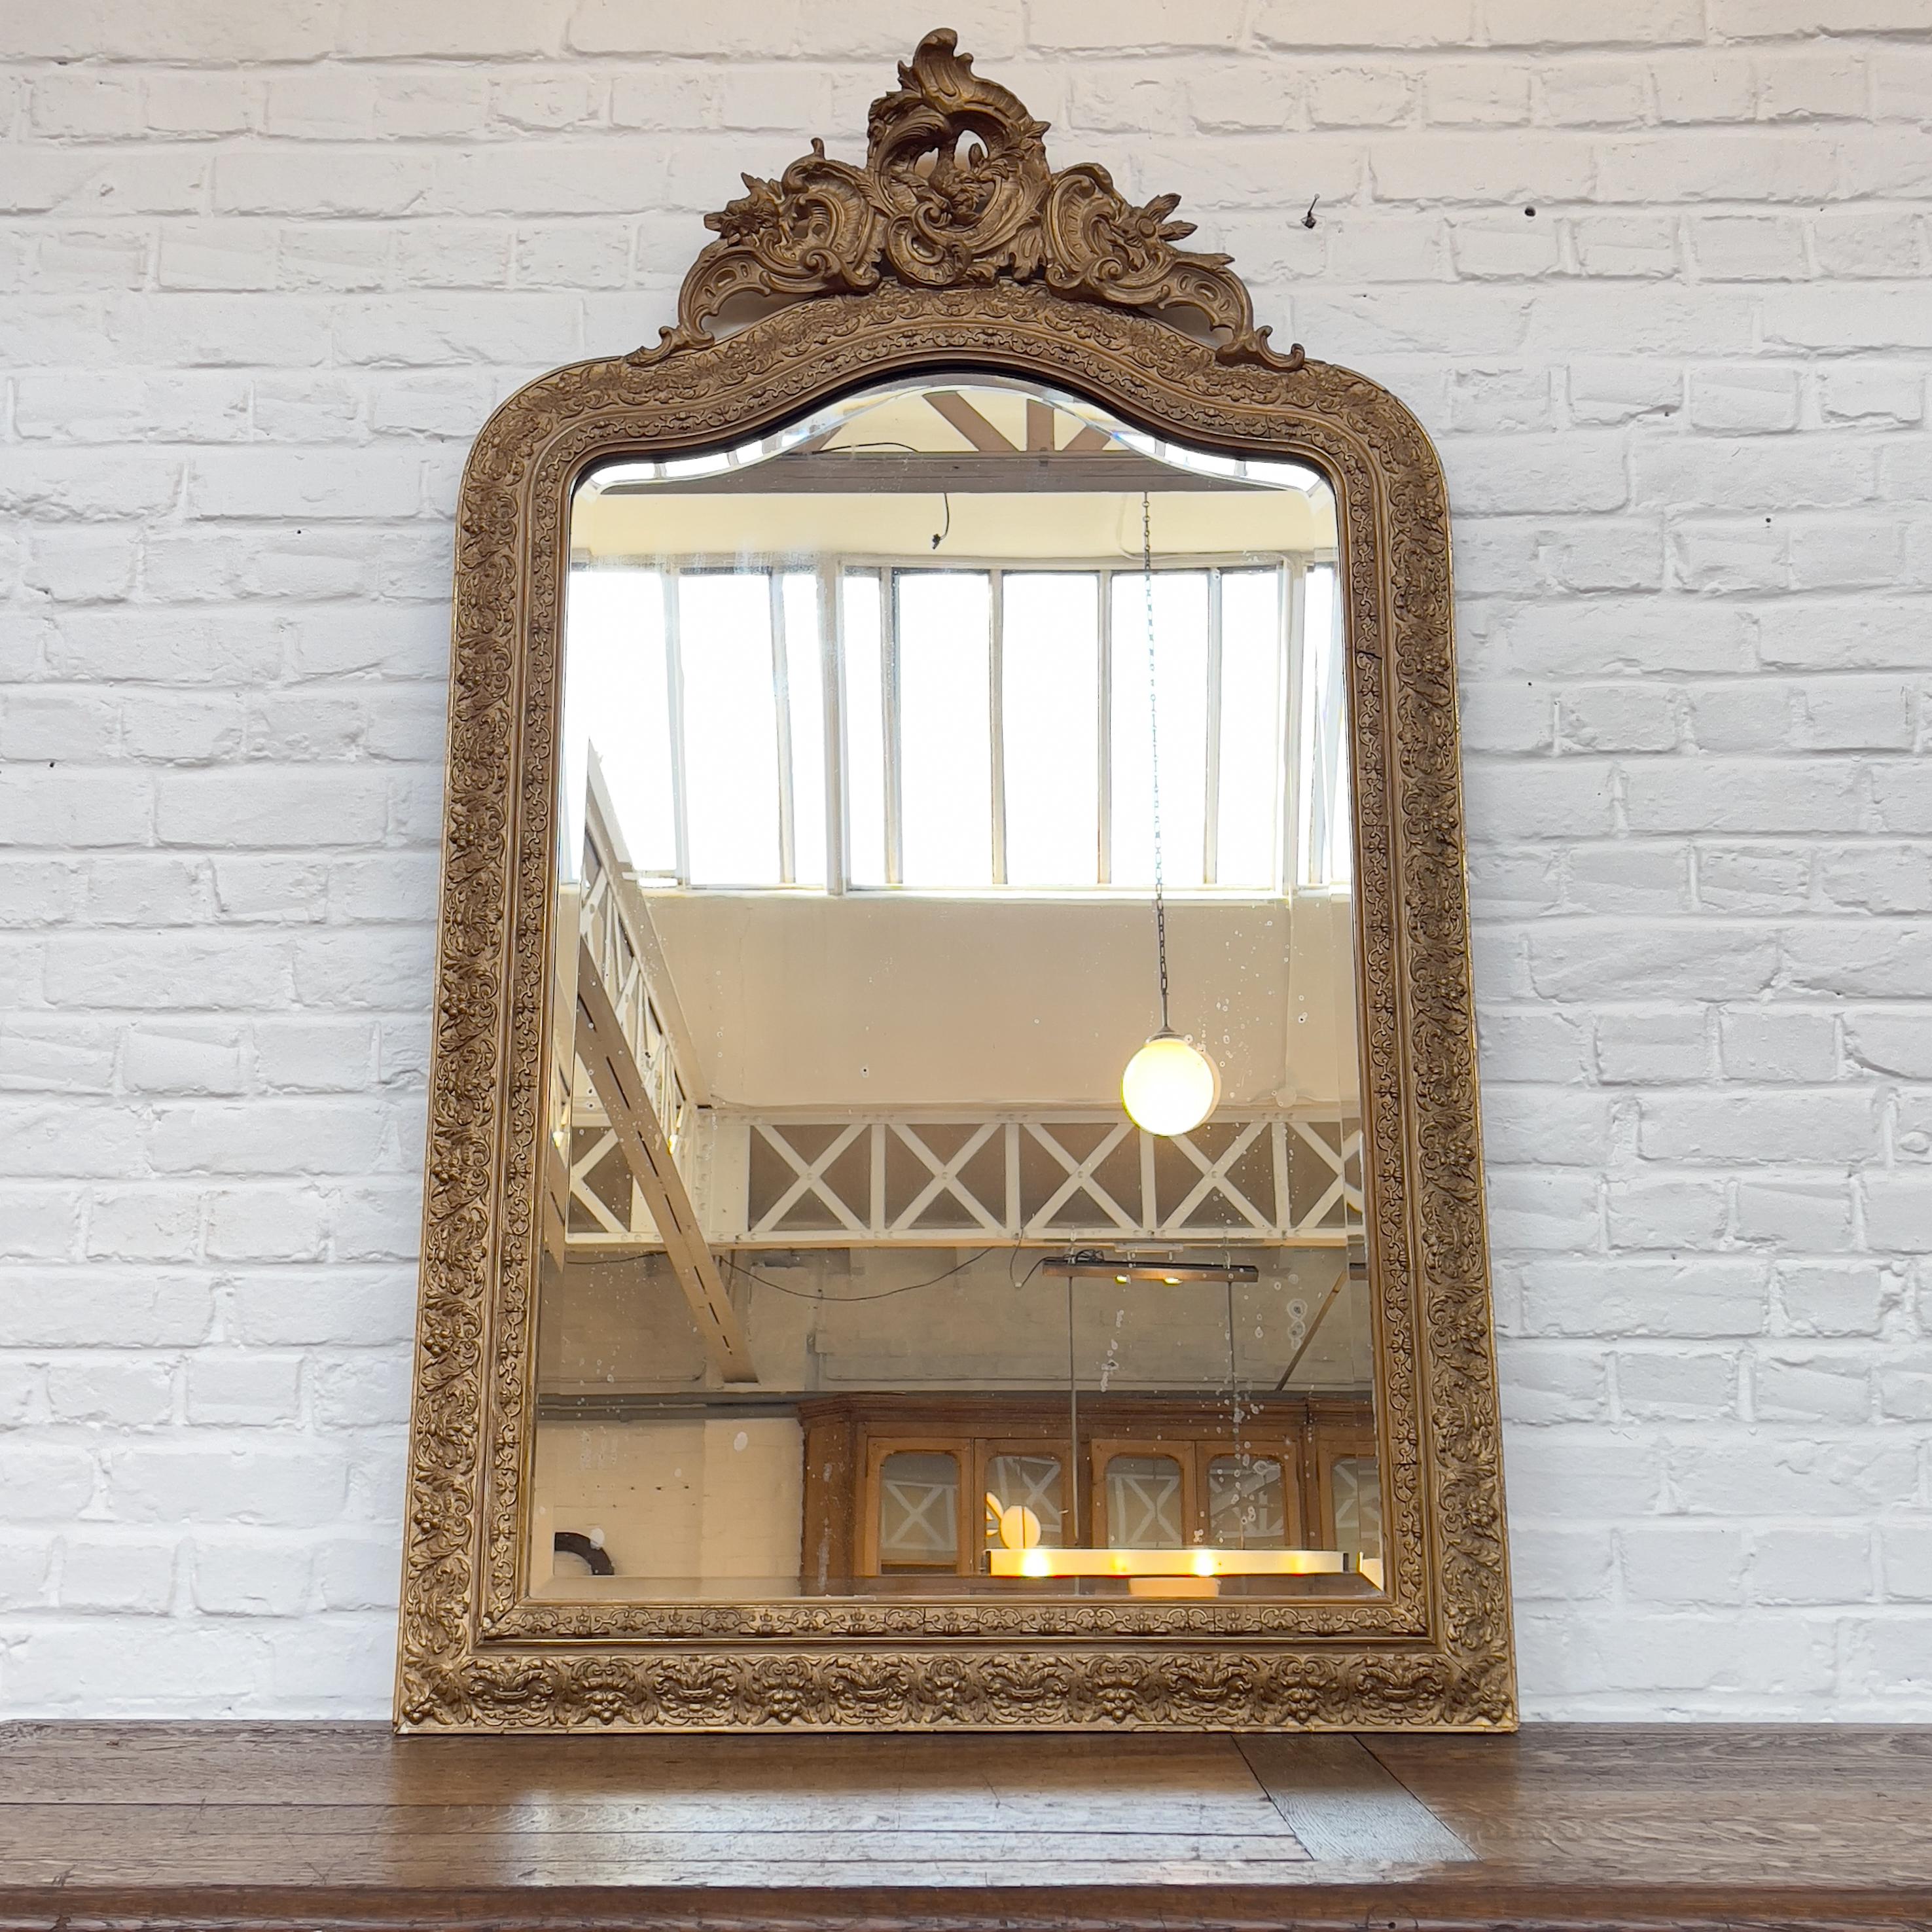 Antique French Mirror Gilded Plaster-Wood 19th
Beveled mirror
Good condition.